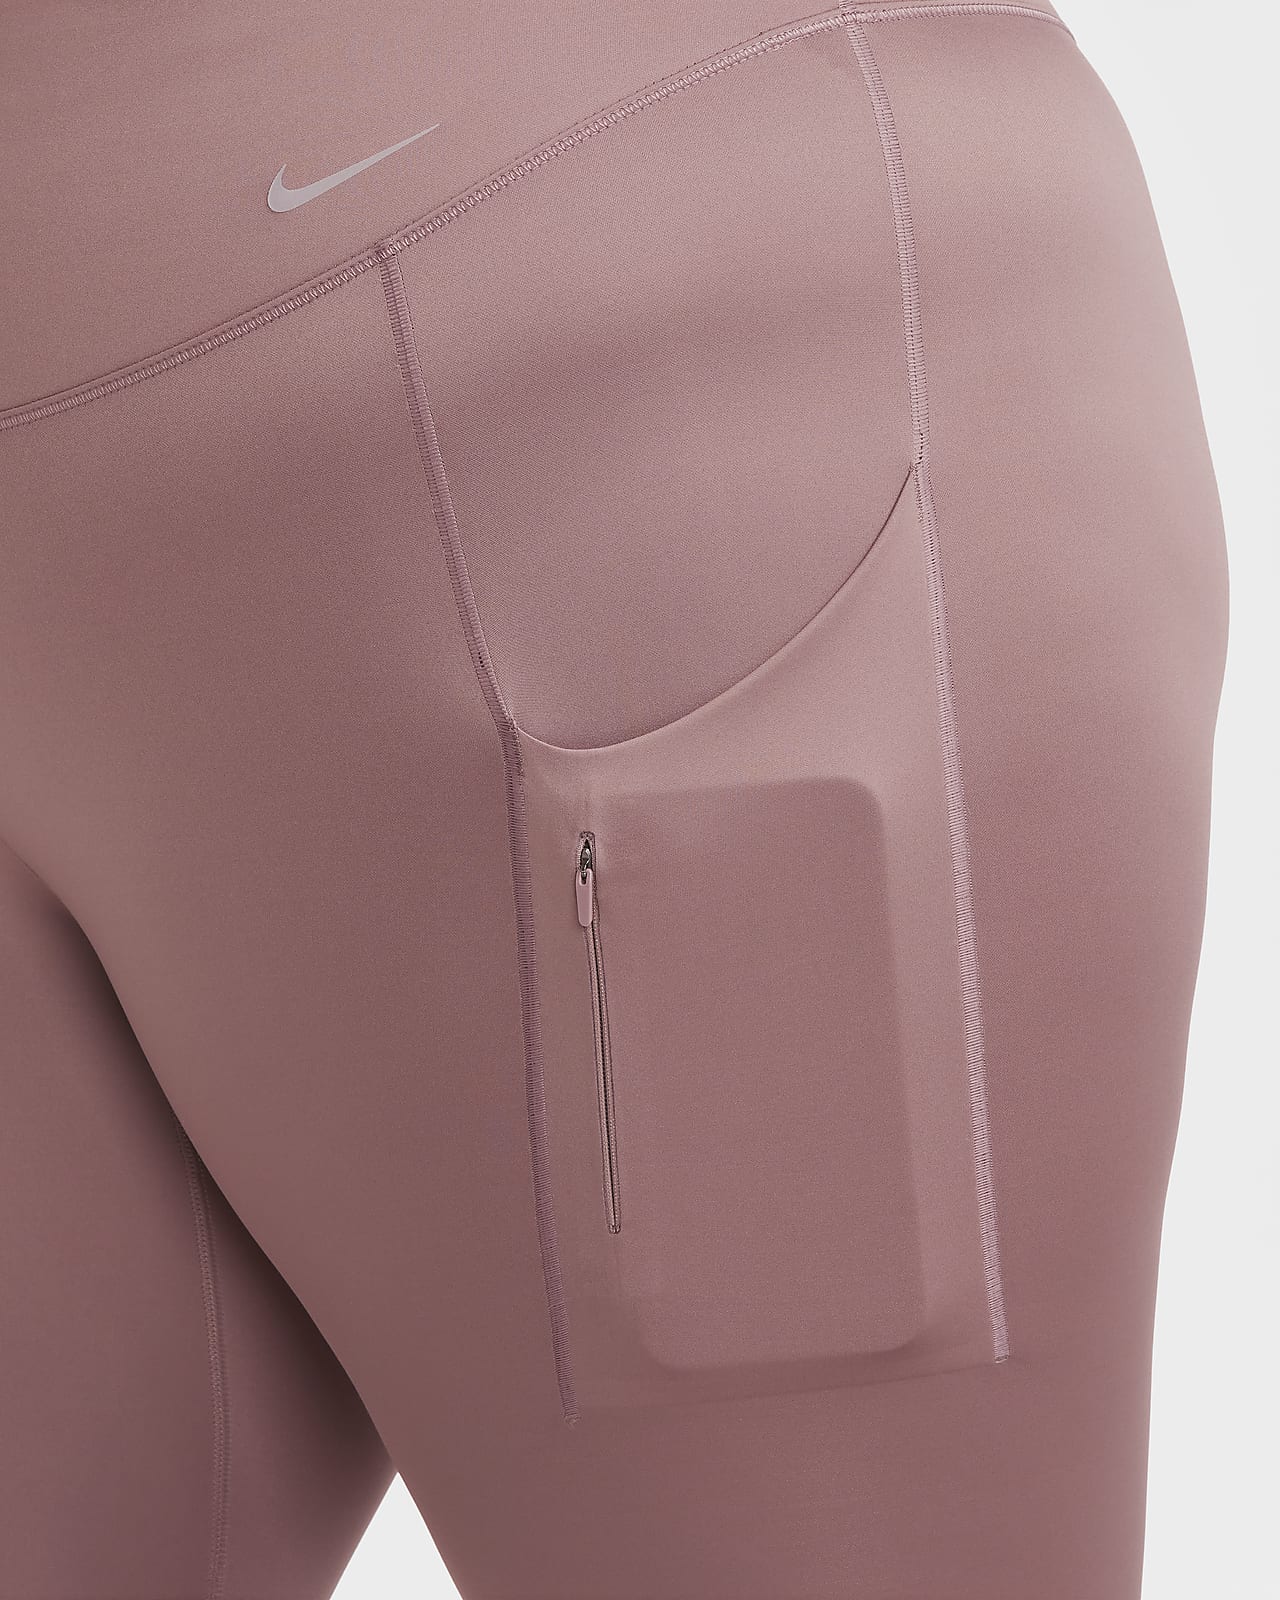 Women's Everyday Soft Ultra High-Rise Leggings - All In Motion™ Pink S